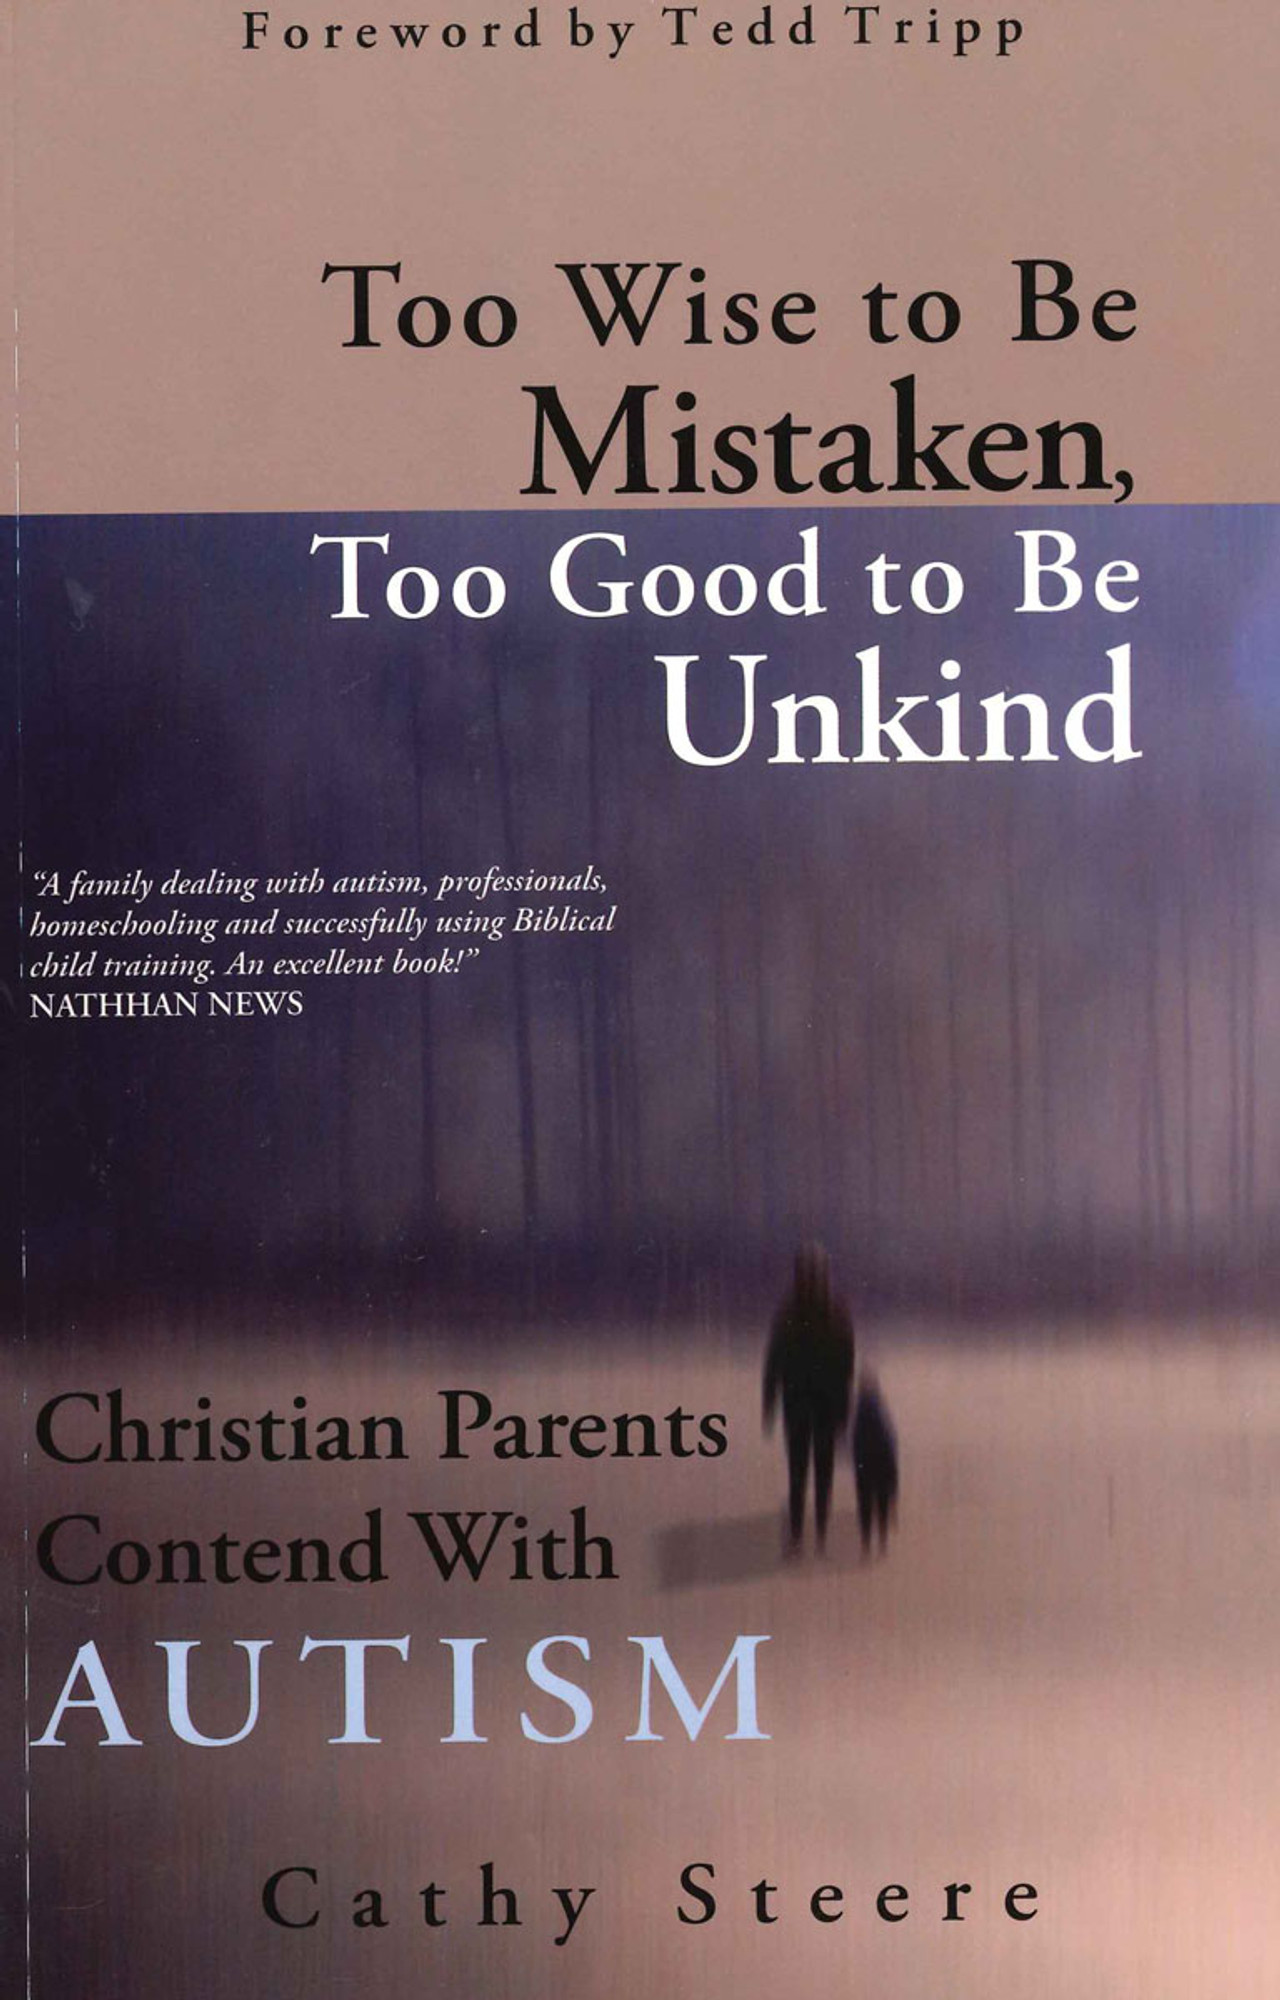 Too Wise to Be Mistaken, Too Good to Be Unkind